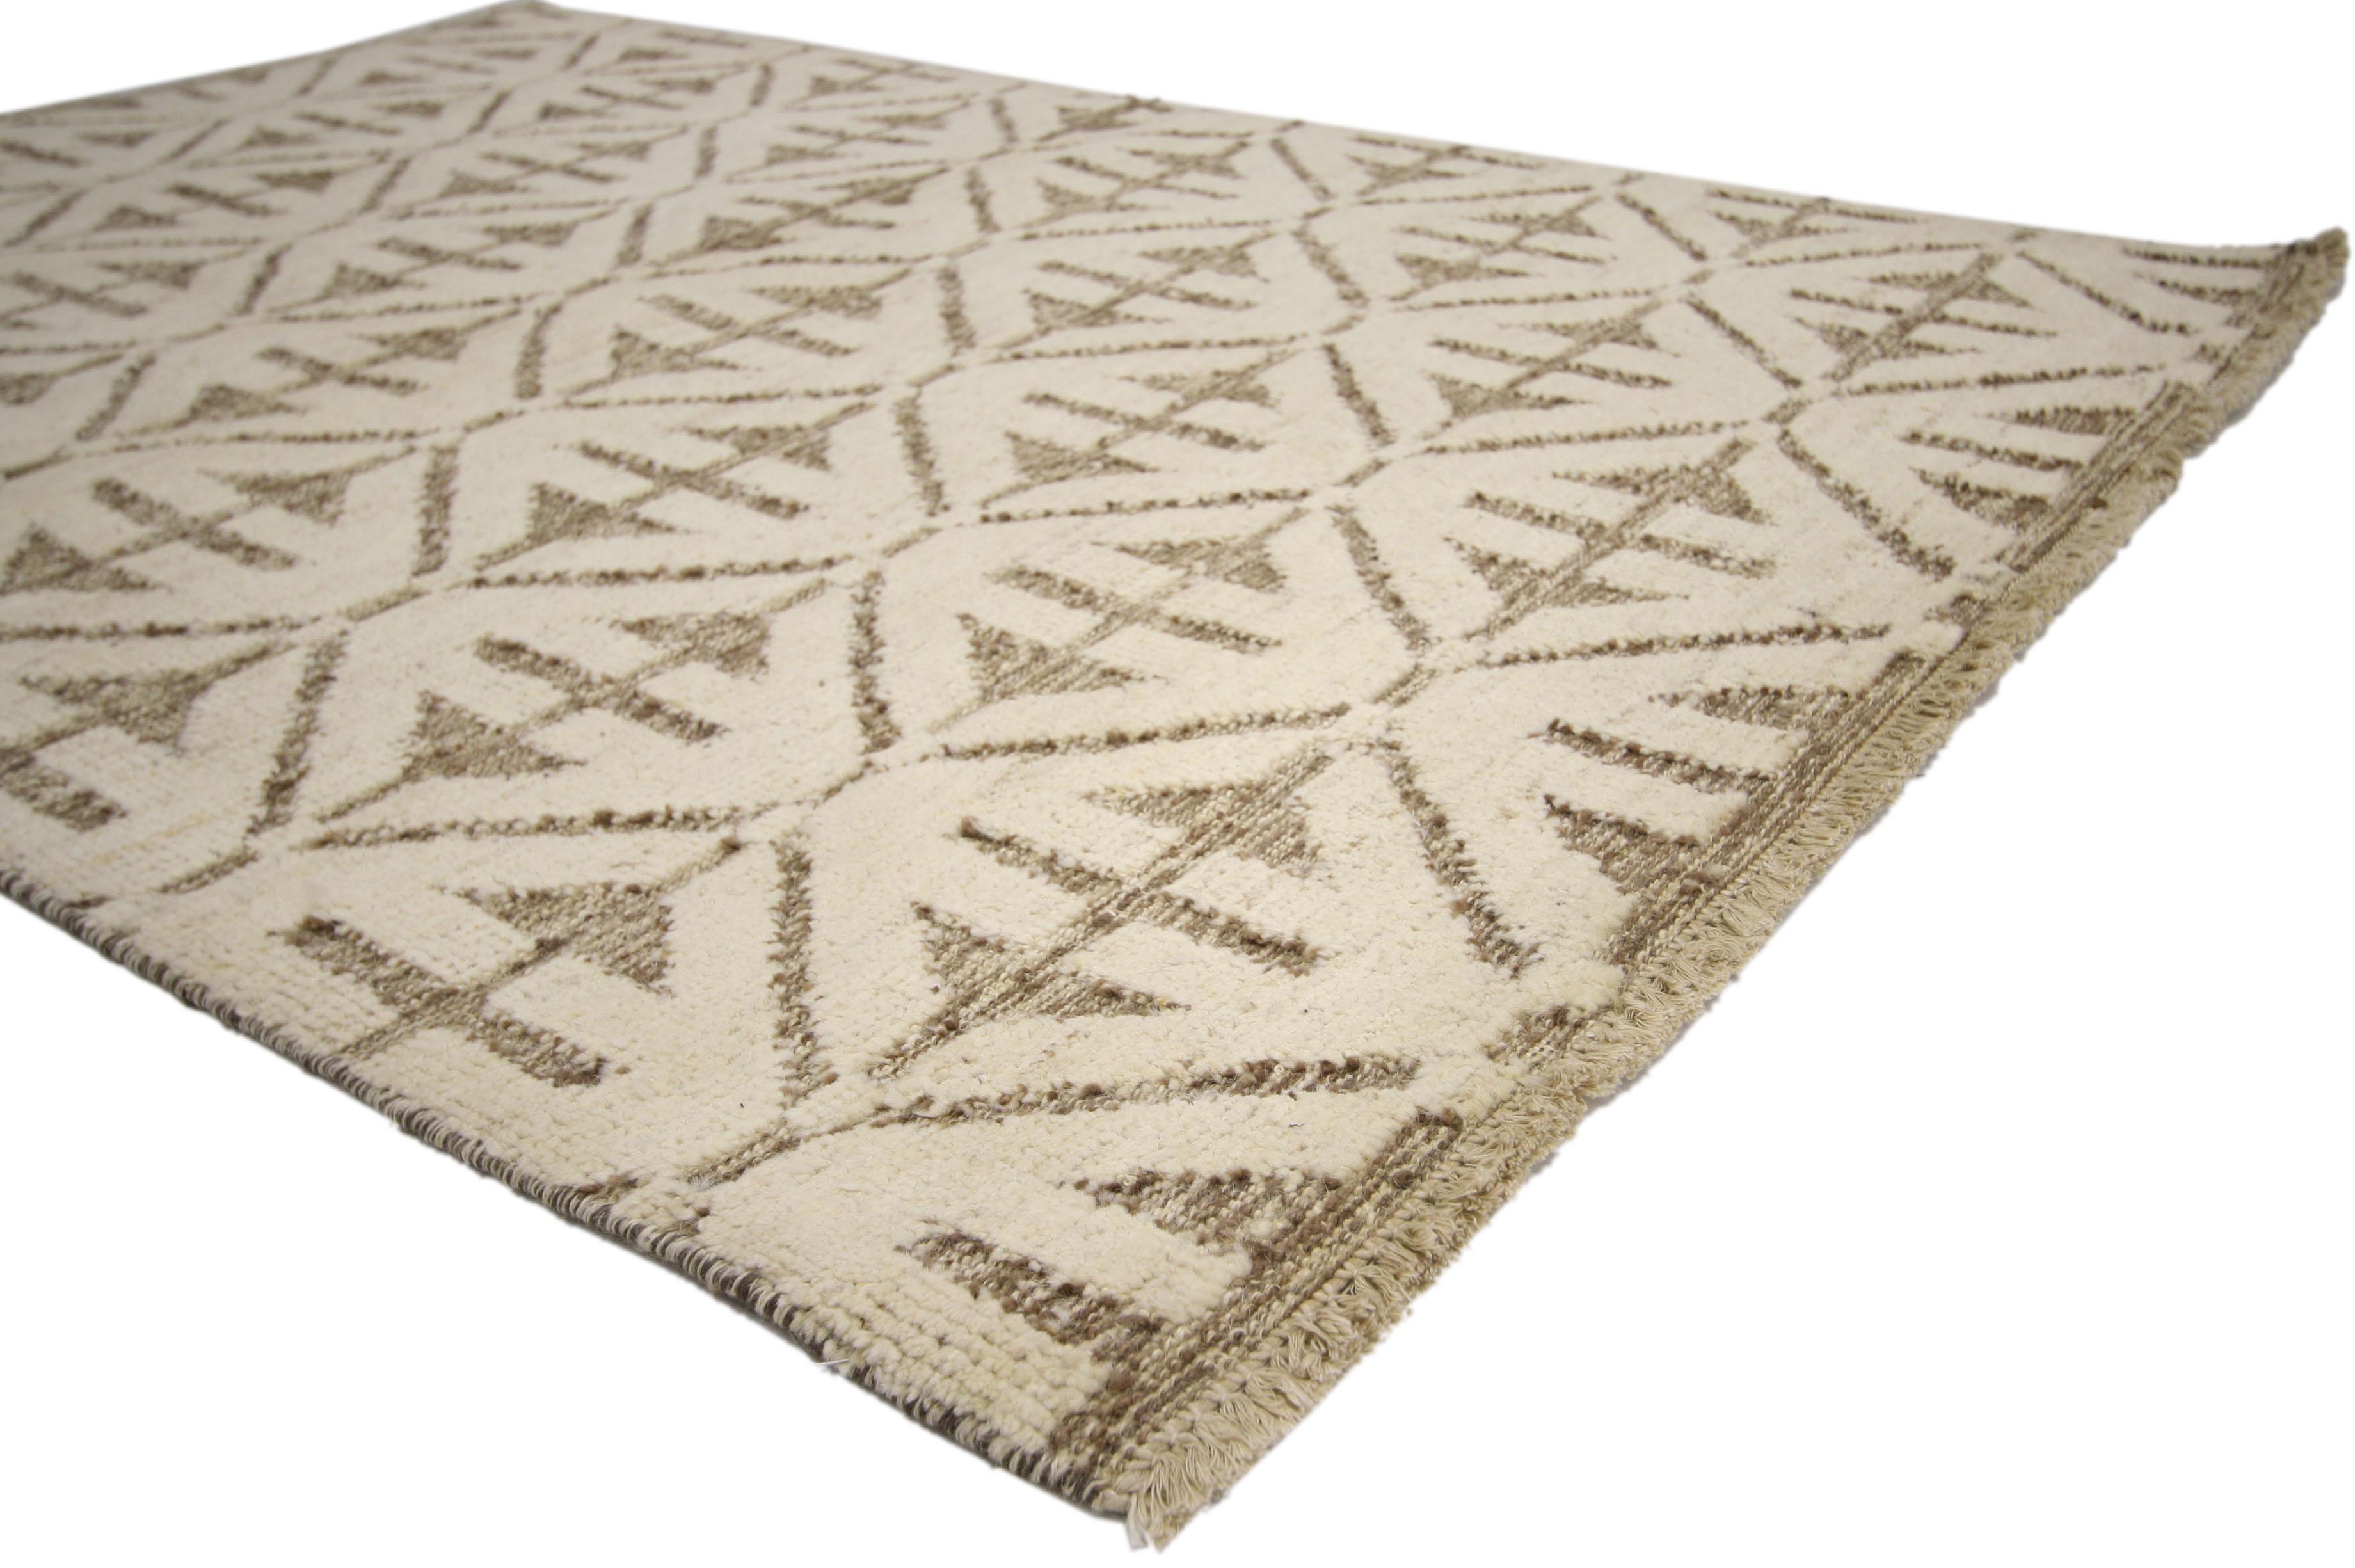 80355, new contemporary high and low texture area rug with Mid-Century Modern style. Spike the energy in your space with graphic geometric shapes found in this contemporary Modern style rug. It is a two layer rug featuring a high and low pile with